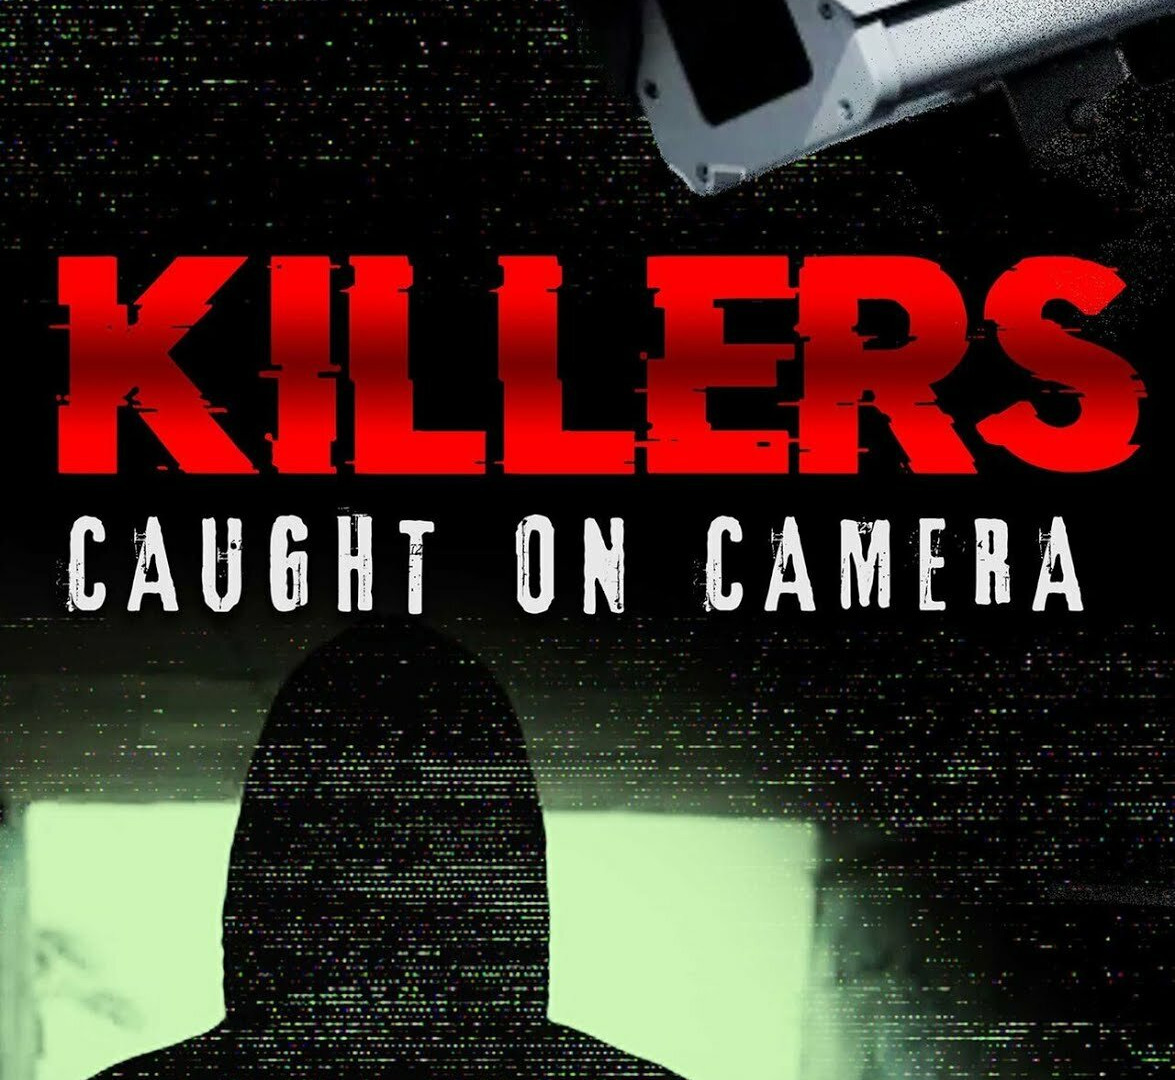 Show Killers: Caught on Camera